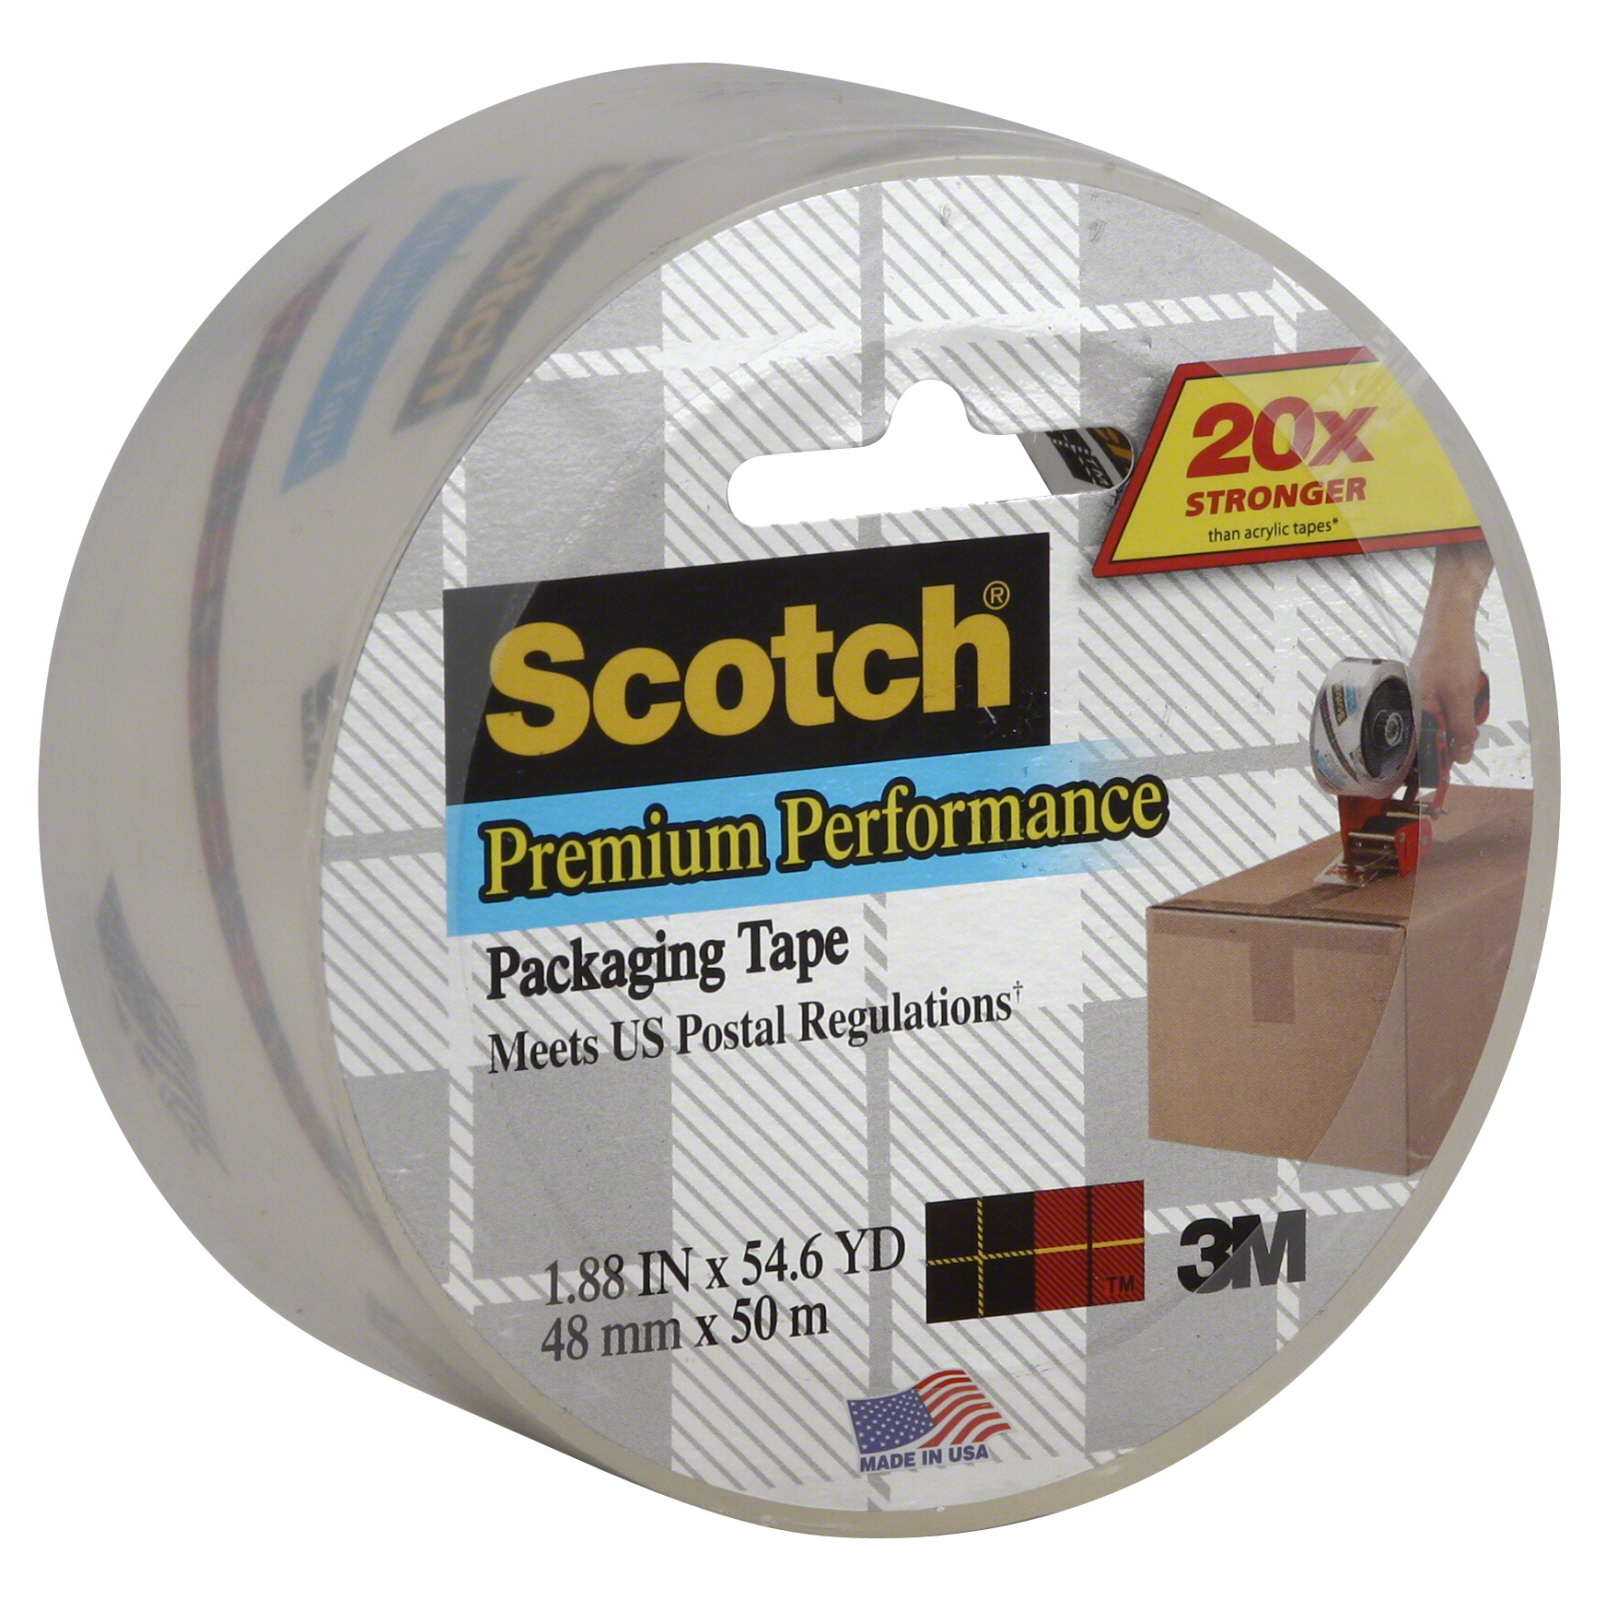 Scotch 3850-1 Packaging Tape, 1 roll